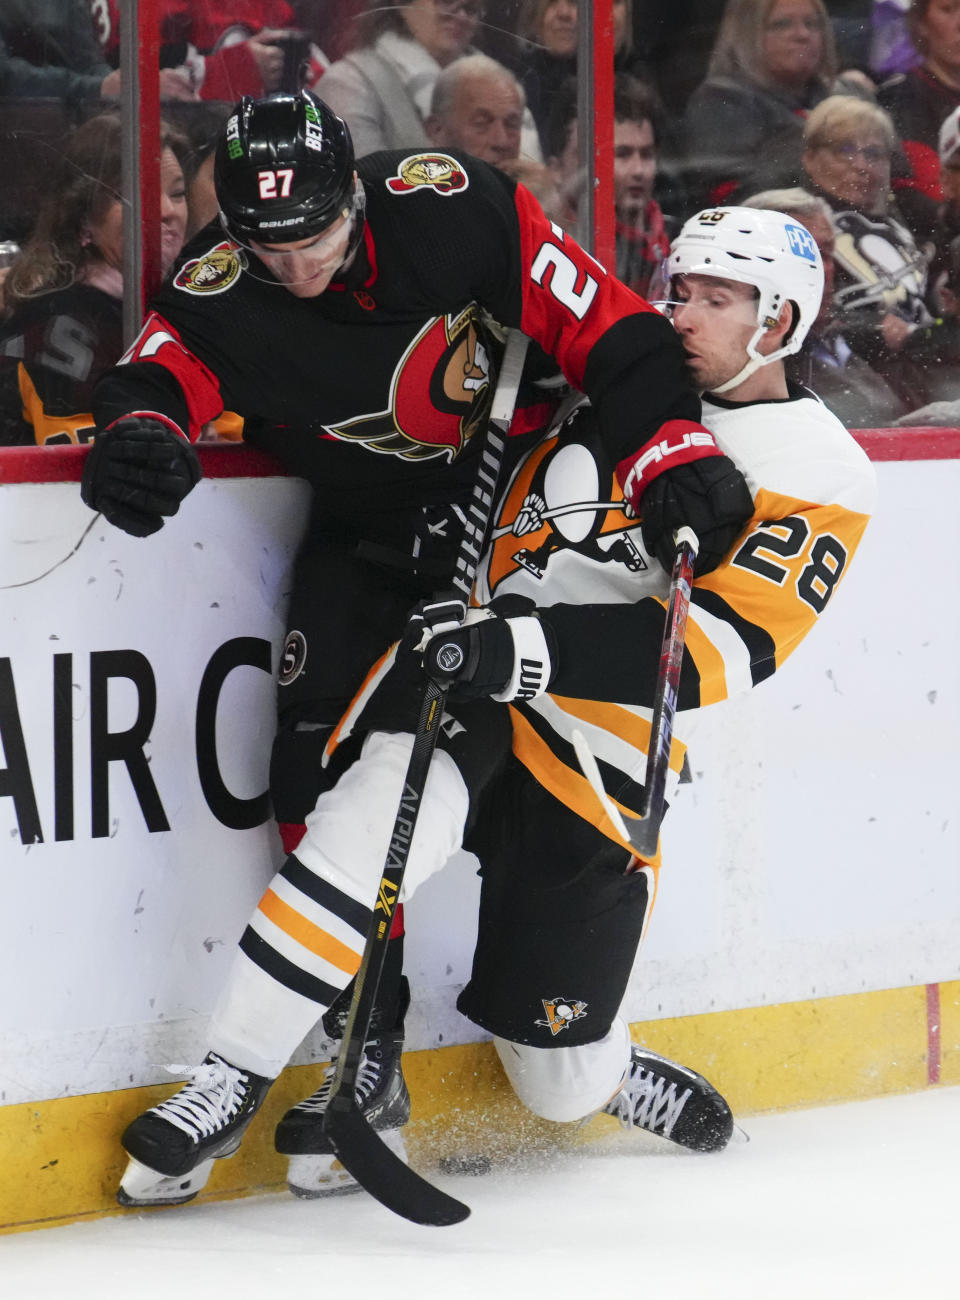 Ottawa Senators center Dylan Gambrell (27) and Pittsburgh Penguins defenseman Marcus Pettersson (28) battle along the boards during the second period of an NHL hockey game Wednesday, Jan. 18, 2023, in Ottawa, Ontario. (Sean Kilpatrick/The Canadian Press via AP)